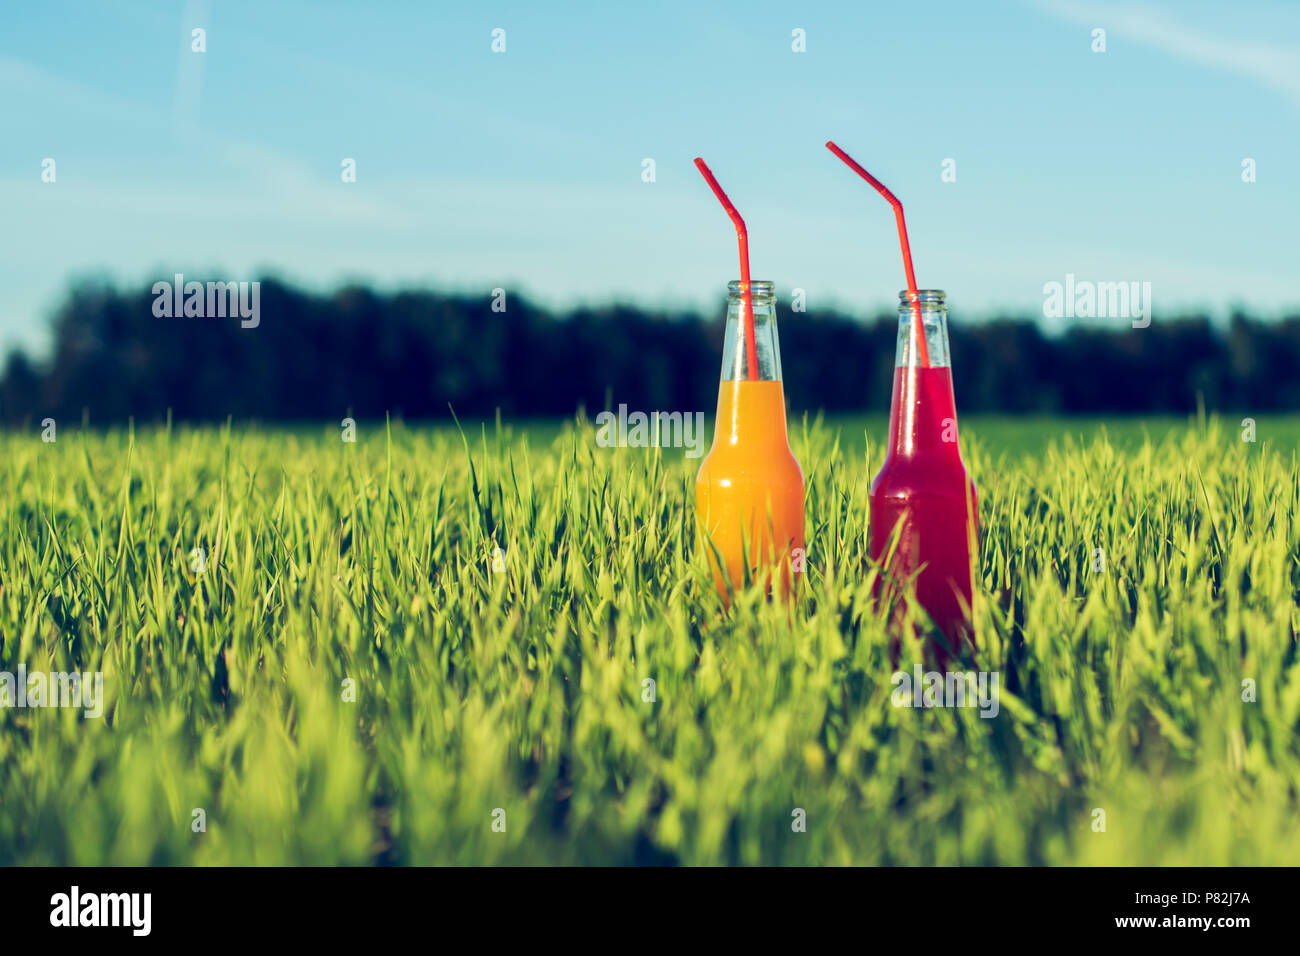 Alcoholic party Coctails red and orange fresh beverage in bottles standing in summer grass with straw Stock Photo